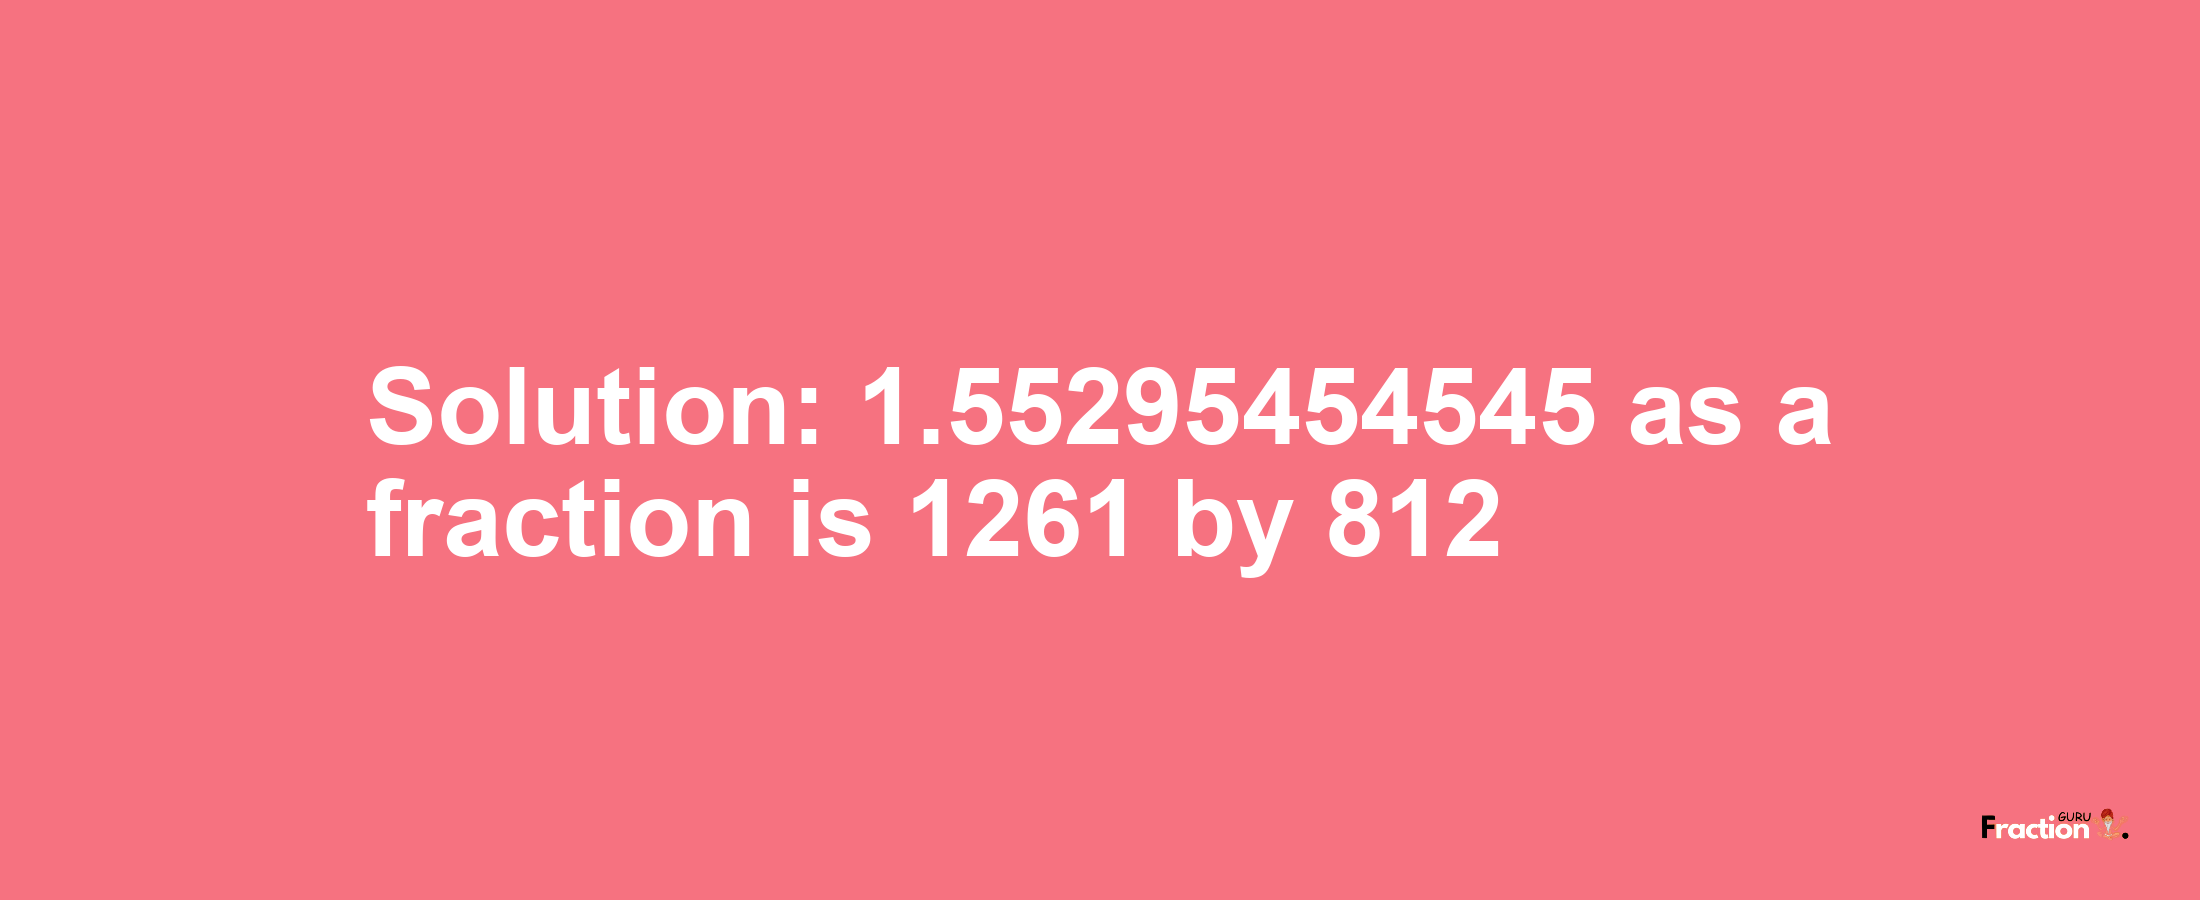 Solution:1.55295454545 as a fraction is 1261/812